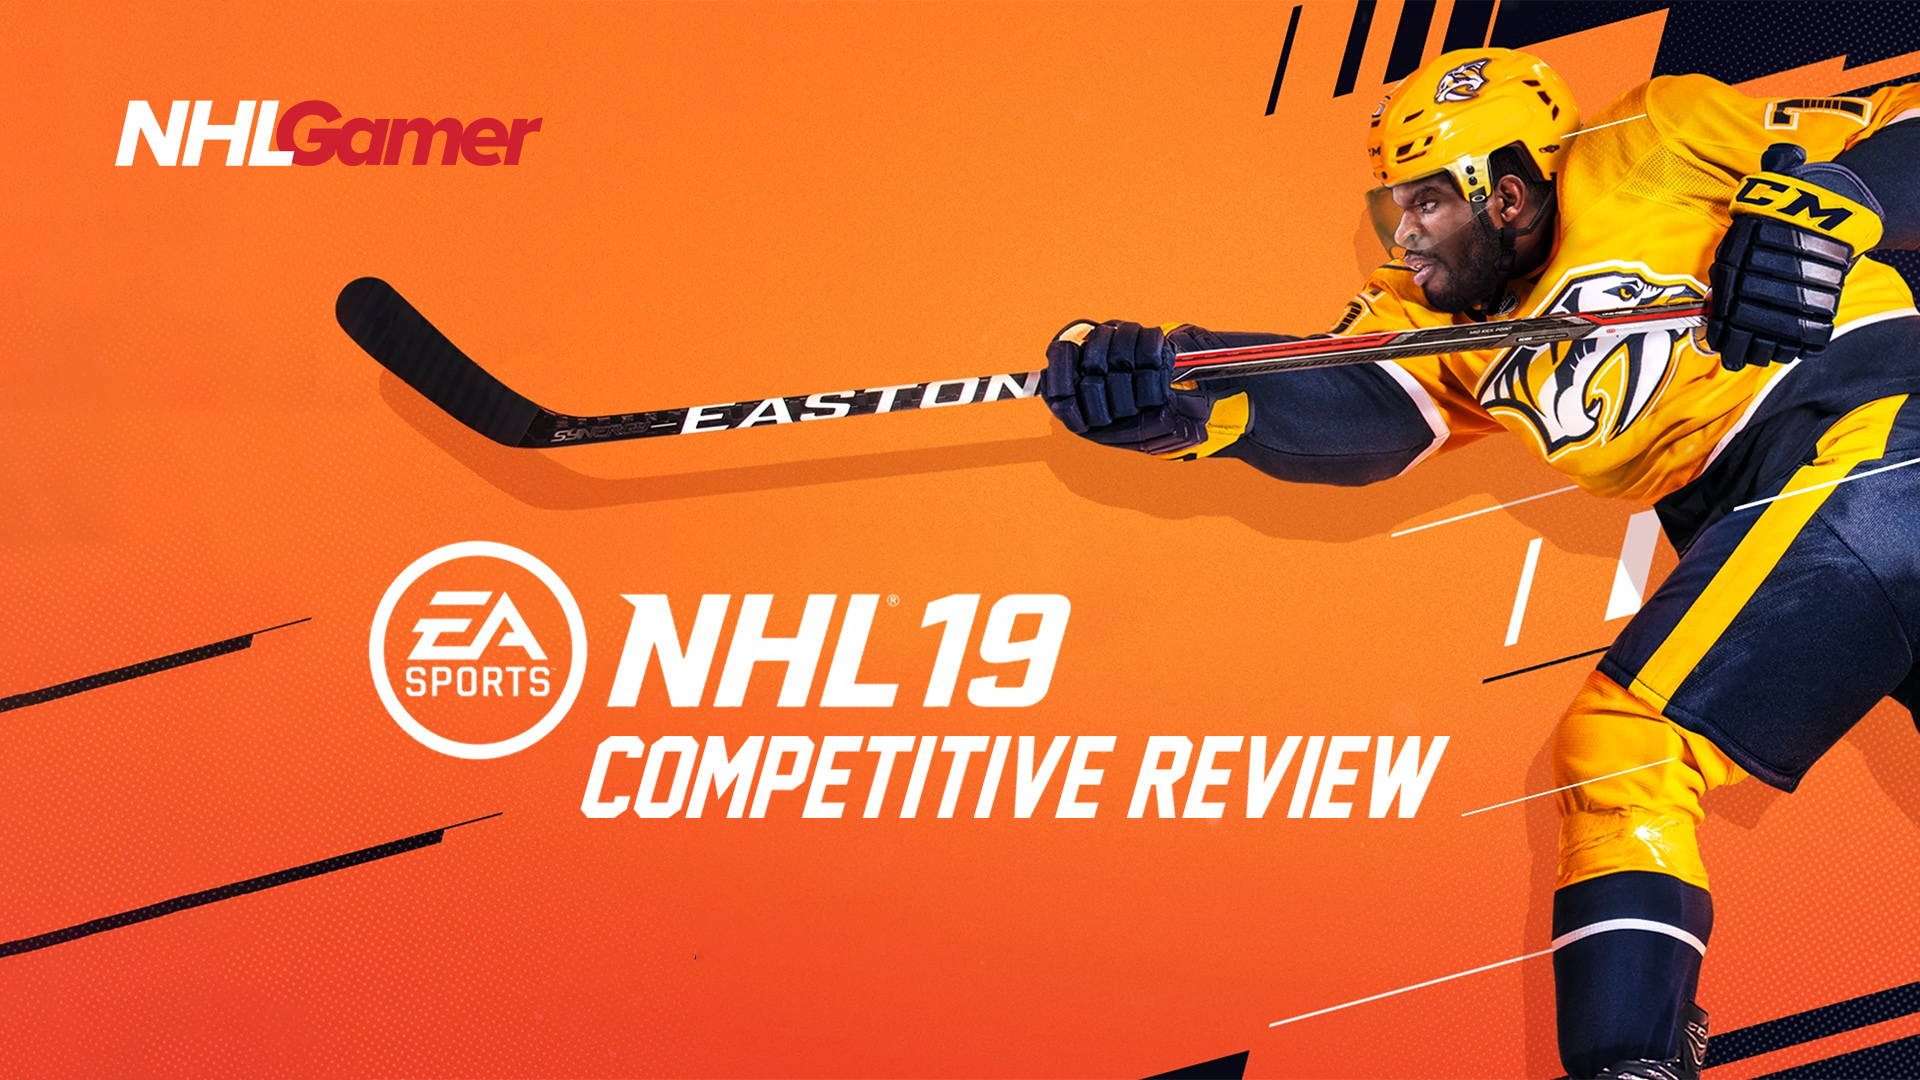 NHL 19 Competitive Review The NHL series has grown up